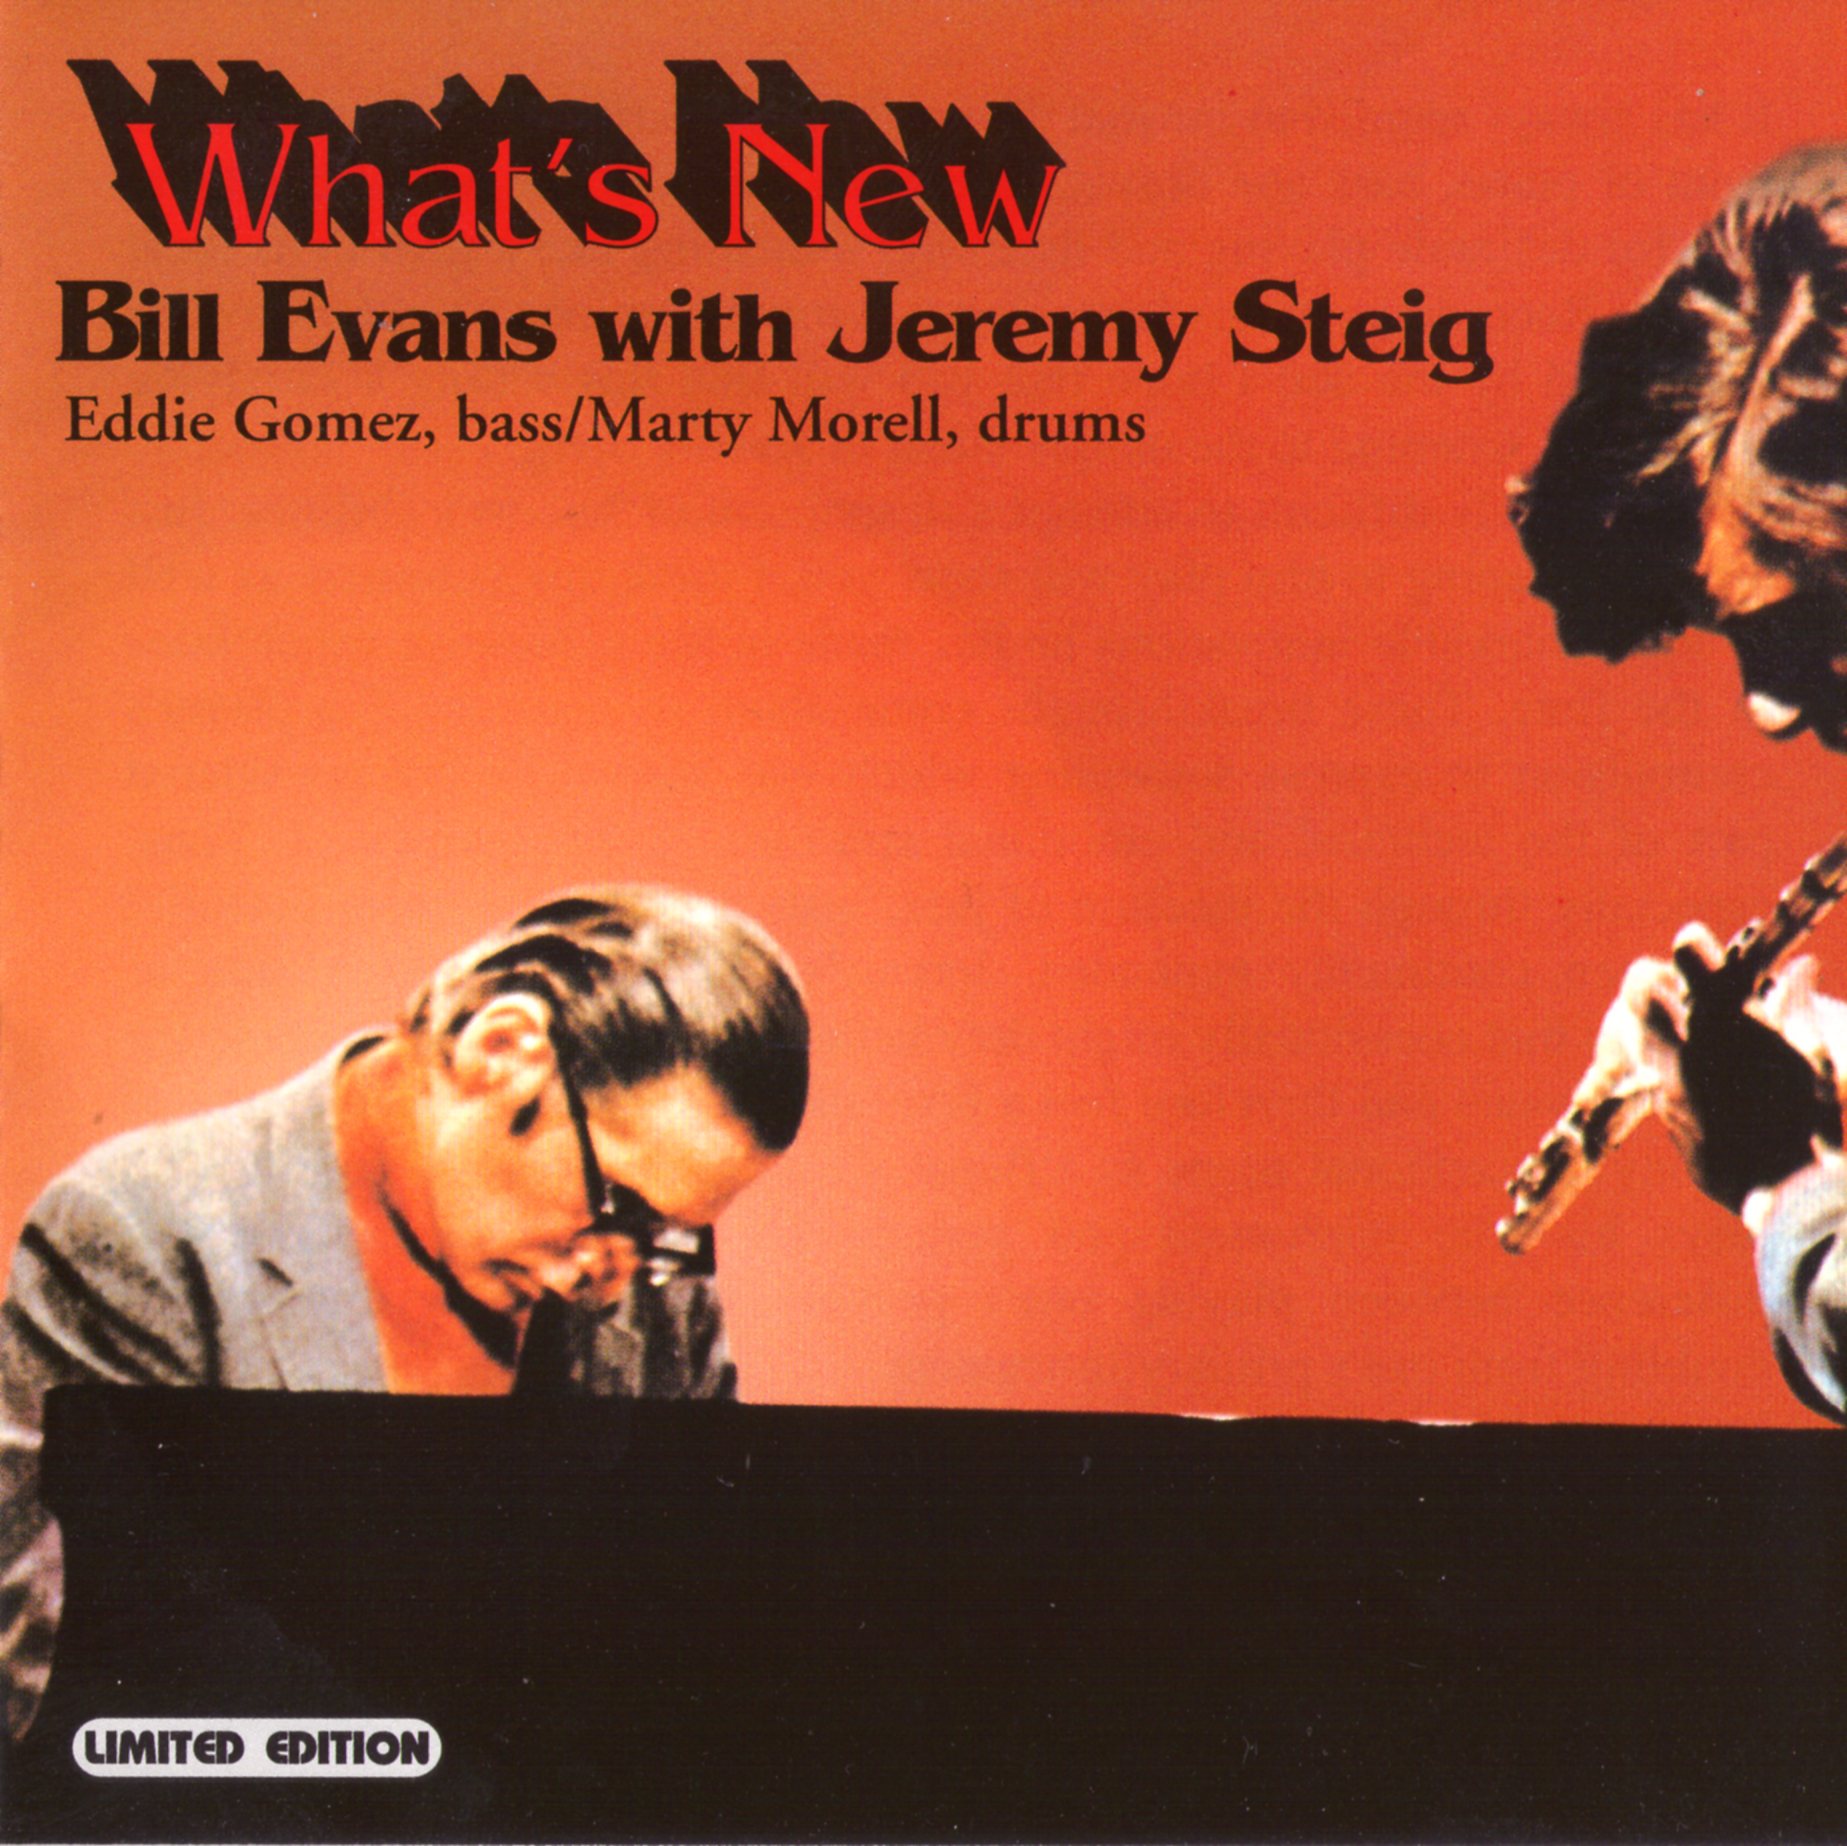 Bill Evans with Jeremy Steig Whats New uabab